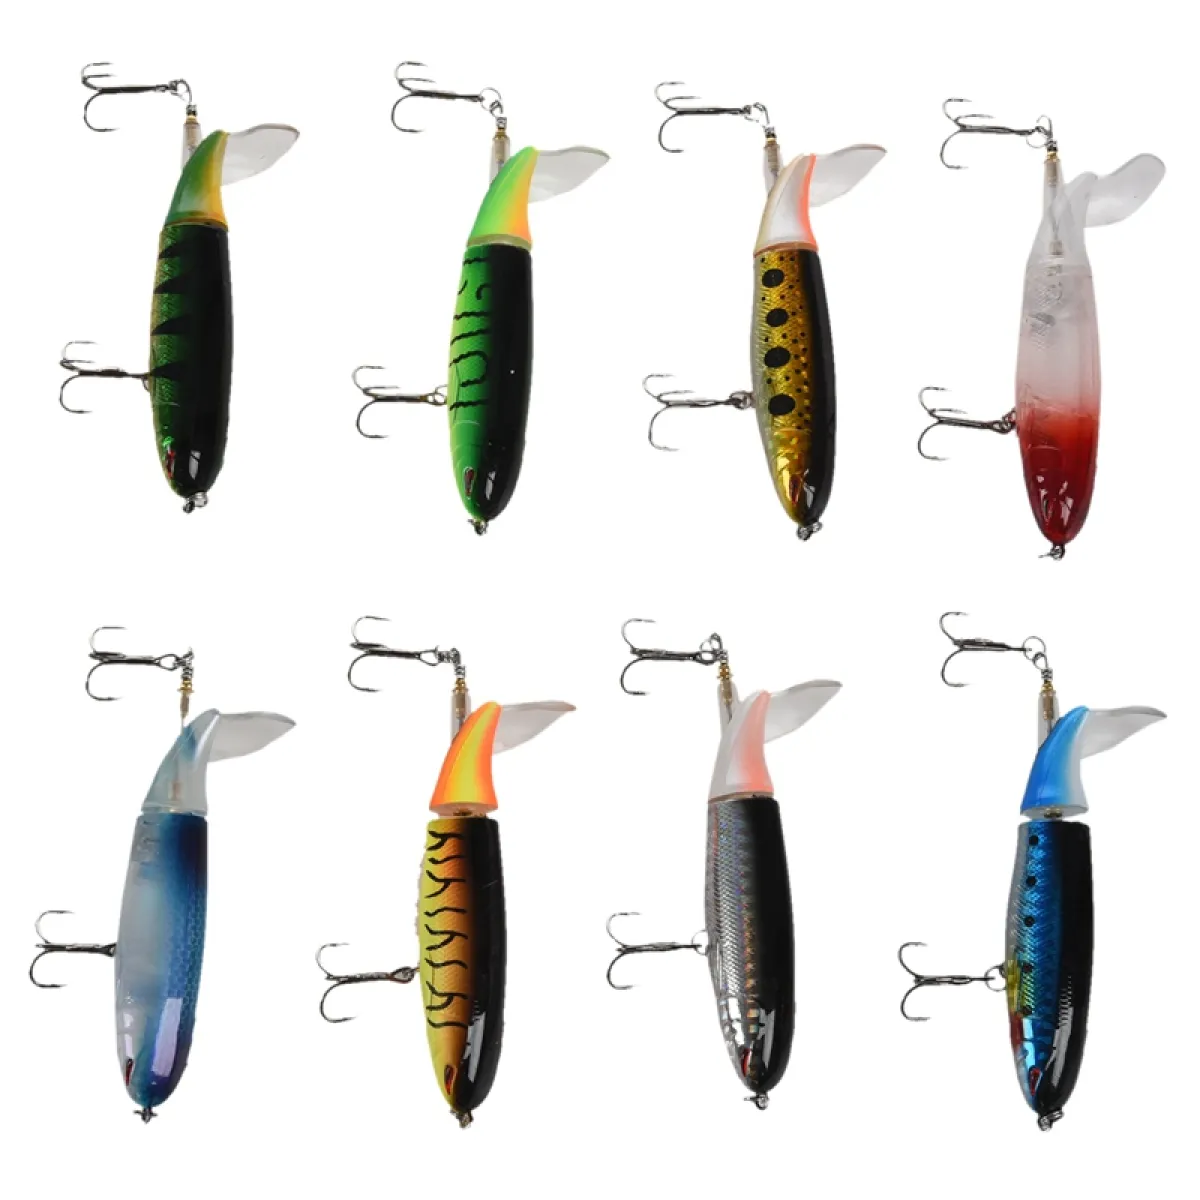 8pcs Fishing Topwater Lures Fishing Lure Rotating Tail Bait for Seabass Pike